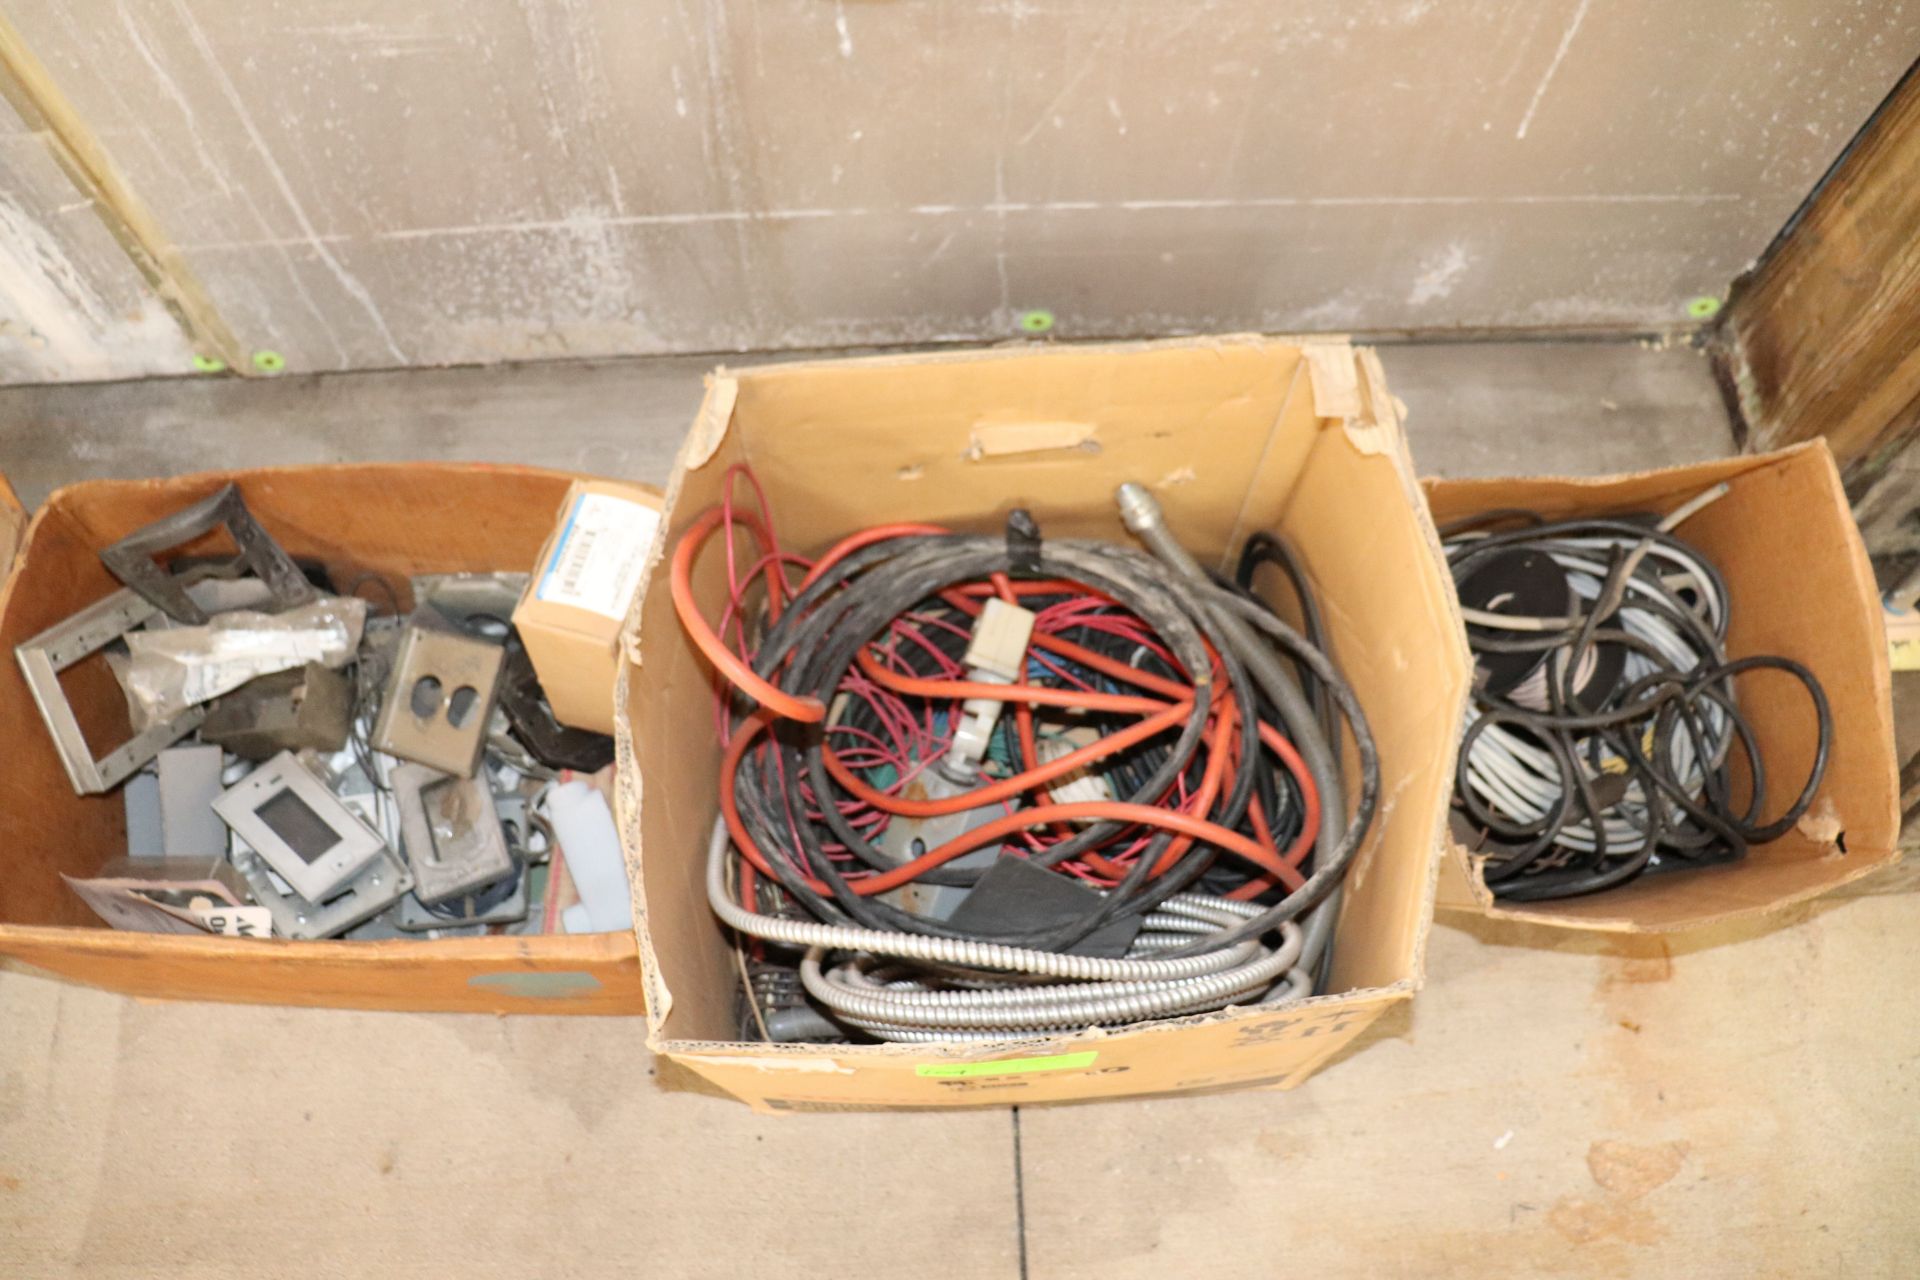 Three boxes of miscellaneous electrical supplies